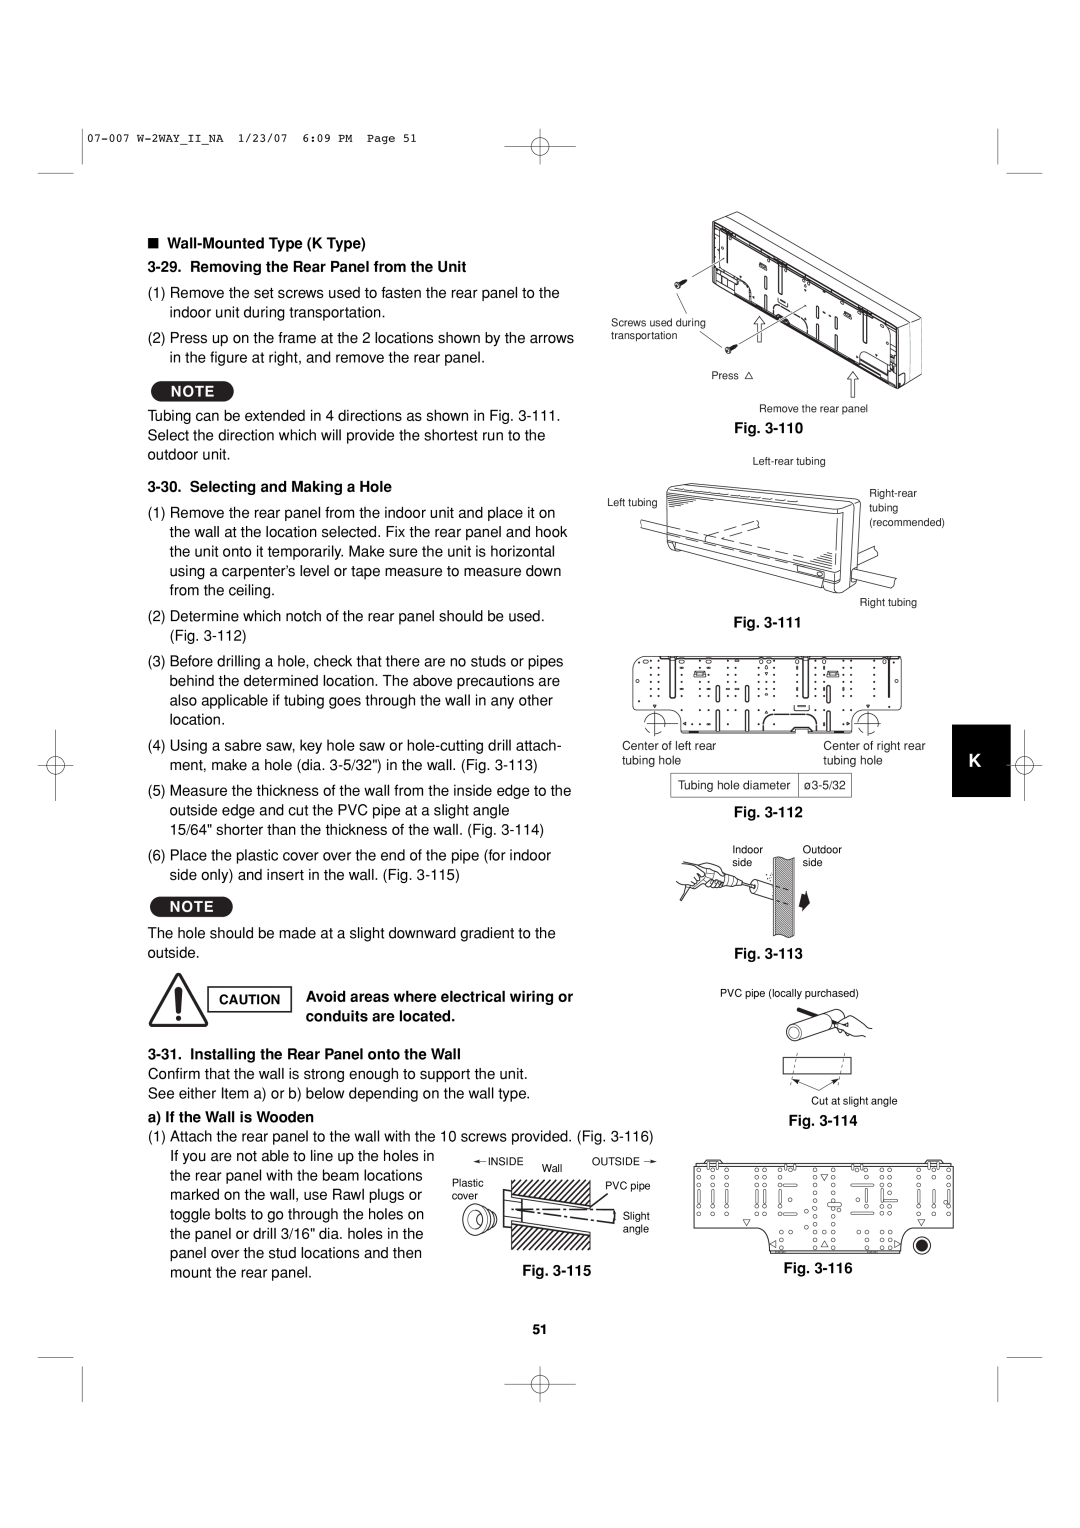 Sanyo 85464359982001 Removing the Rear Panel from the Unit, Selecting and Making a Hole, Wall-MountedType K Type, Fig 